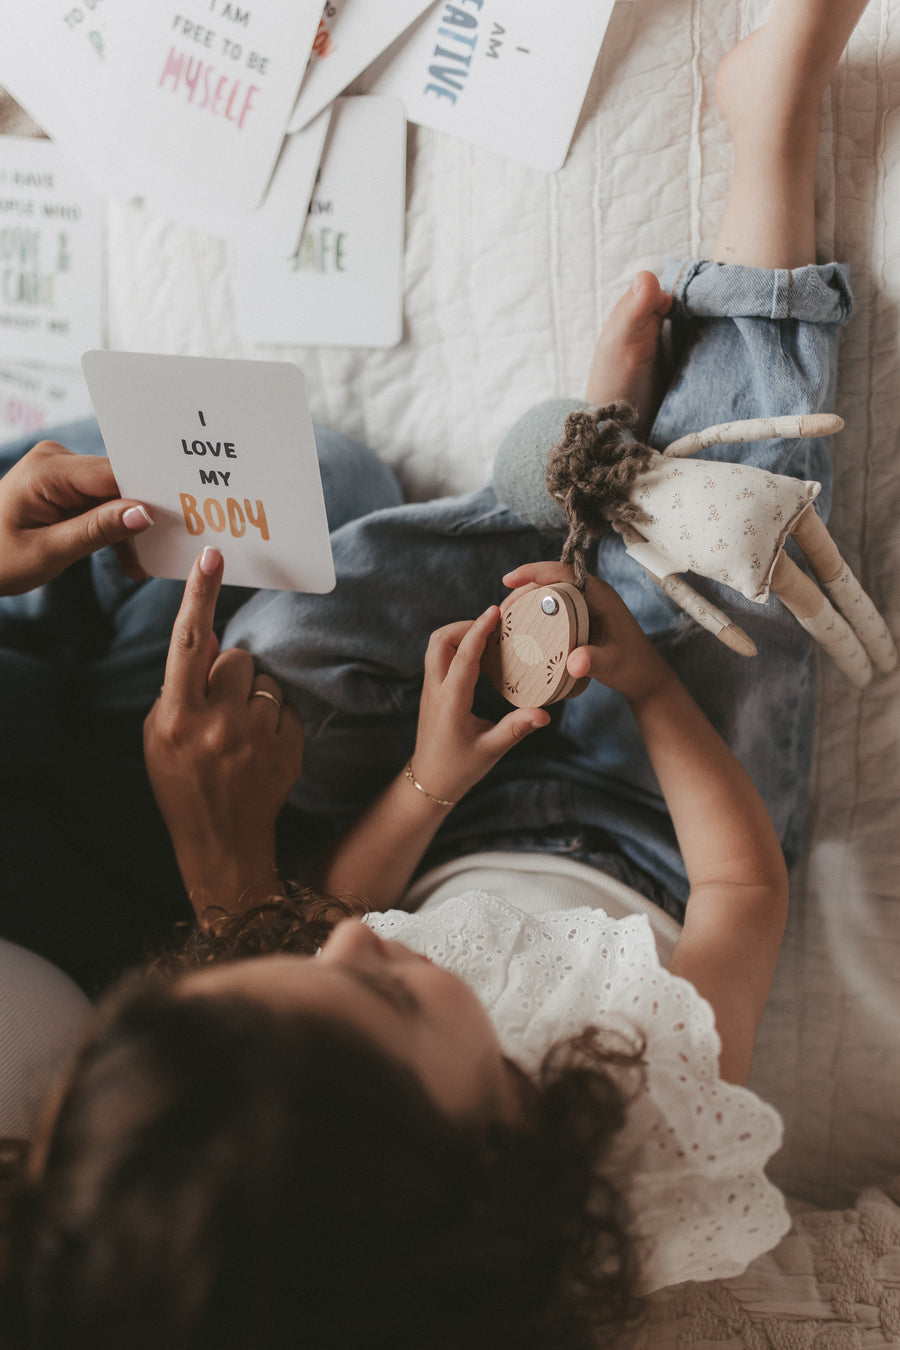 By incorporating Affirmation Cards into your child’s daily routine, they will learn to navigate their feelings and above all, to love themselves for who they are.